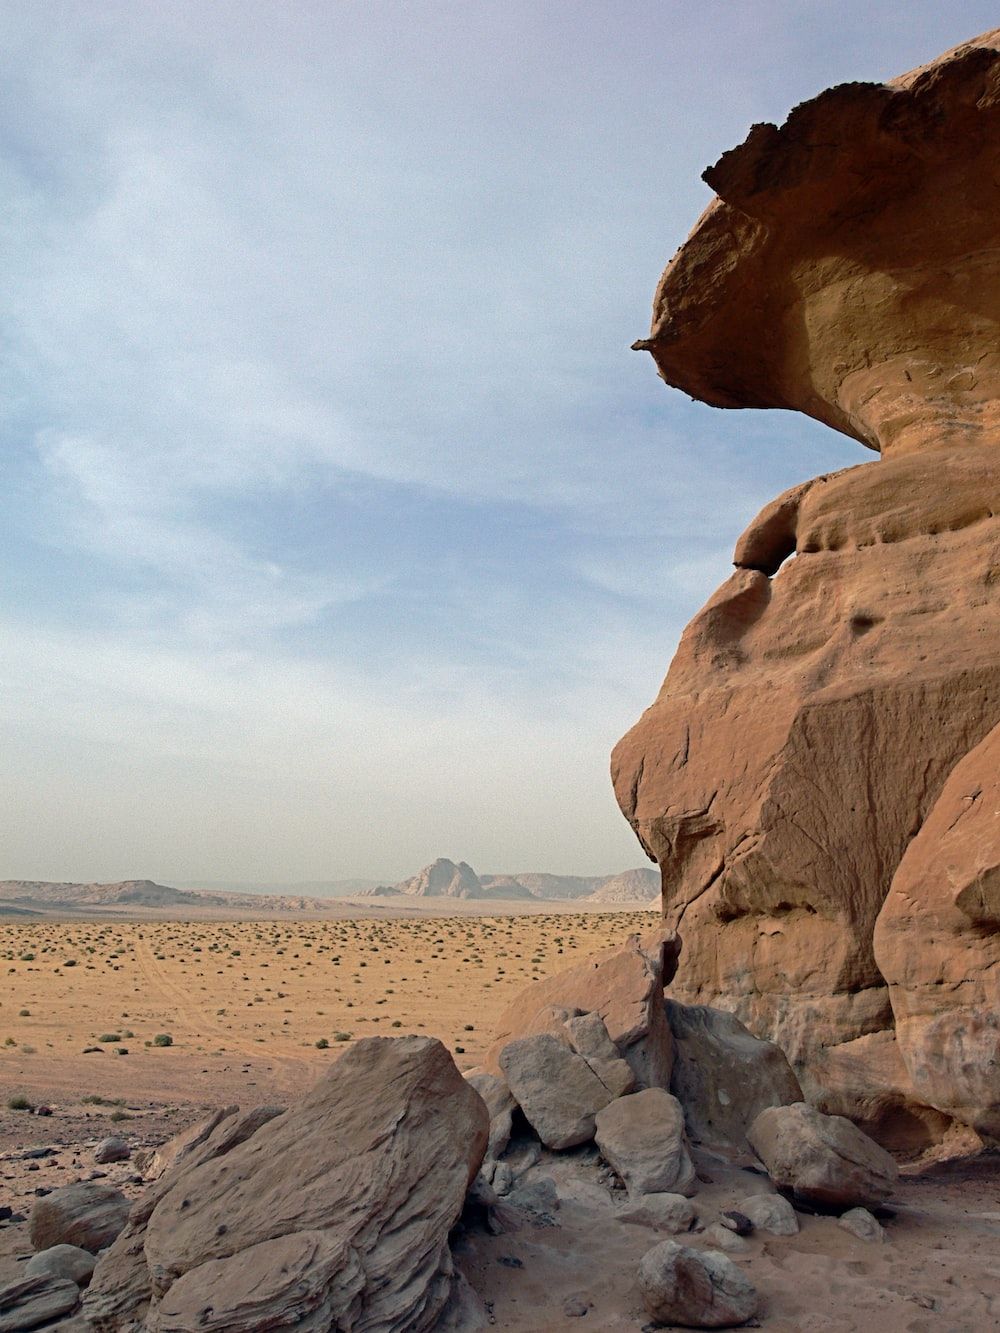 Desert Rock Picture. Download Free Image